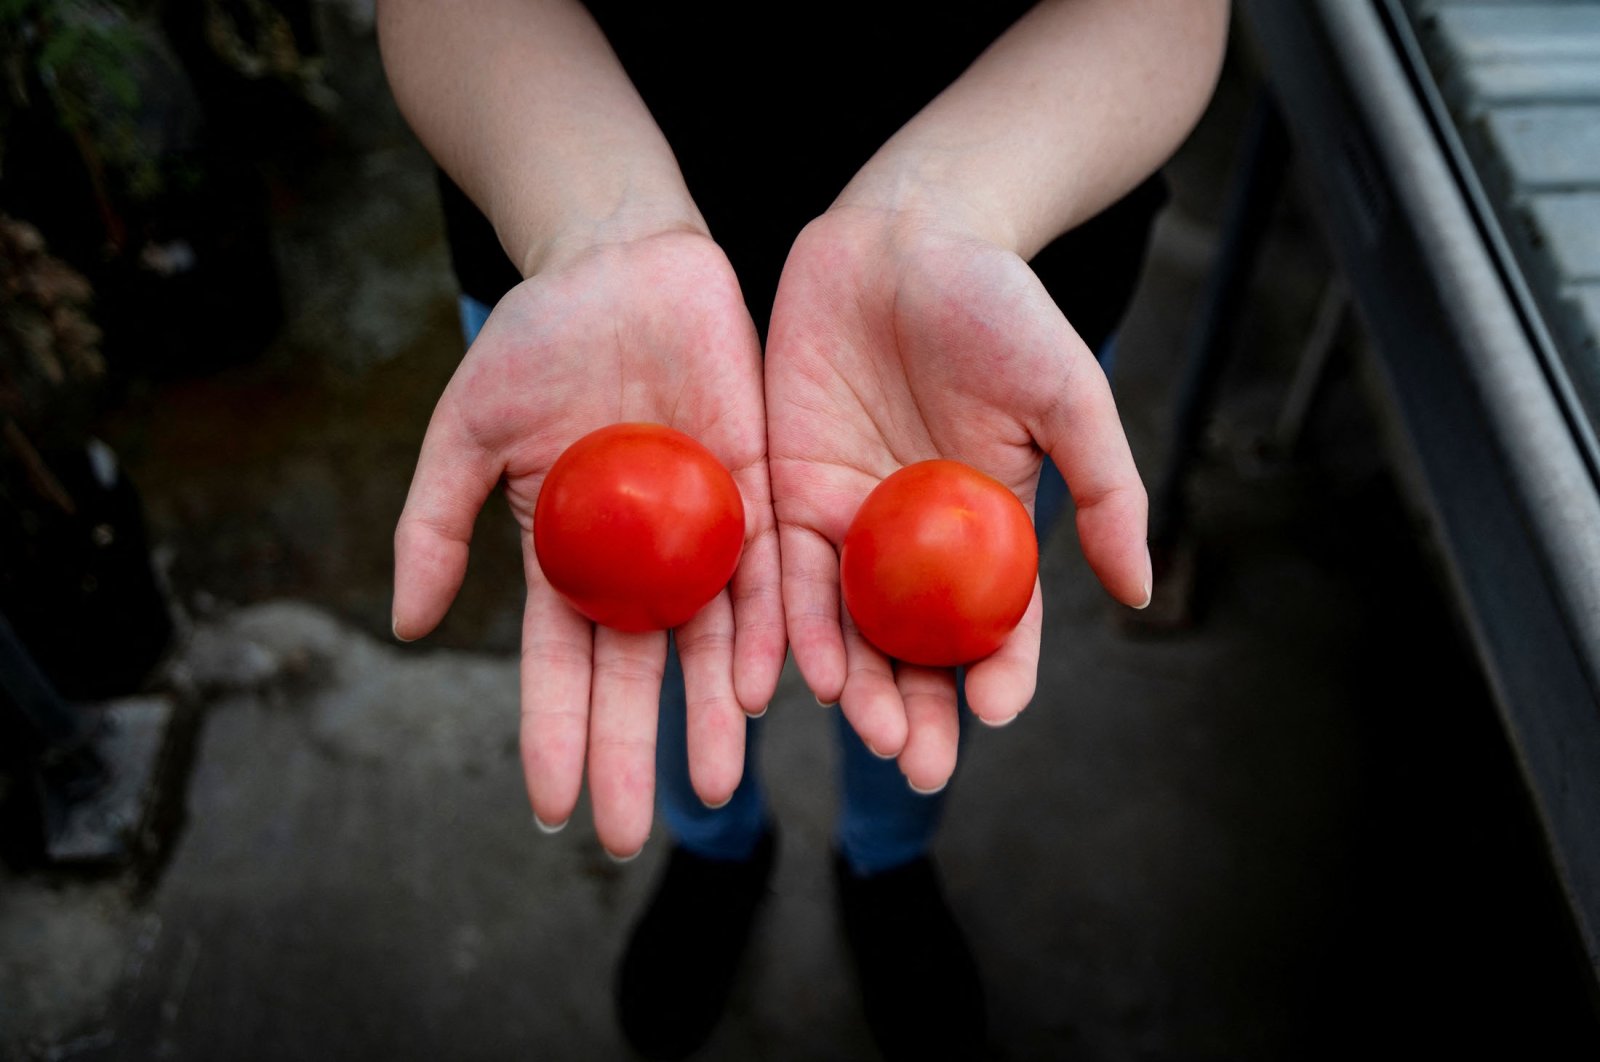 A researcher holds a gene-edited vitamin D tomato (L) and a regular tomato at the John Innes Center in Norwich, U.K., May 23, 2022. (John Innes Center via Reuters)